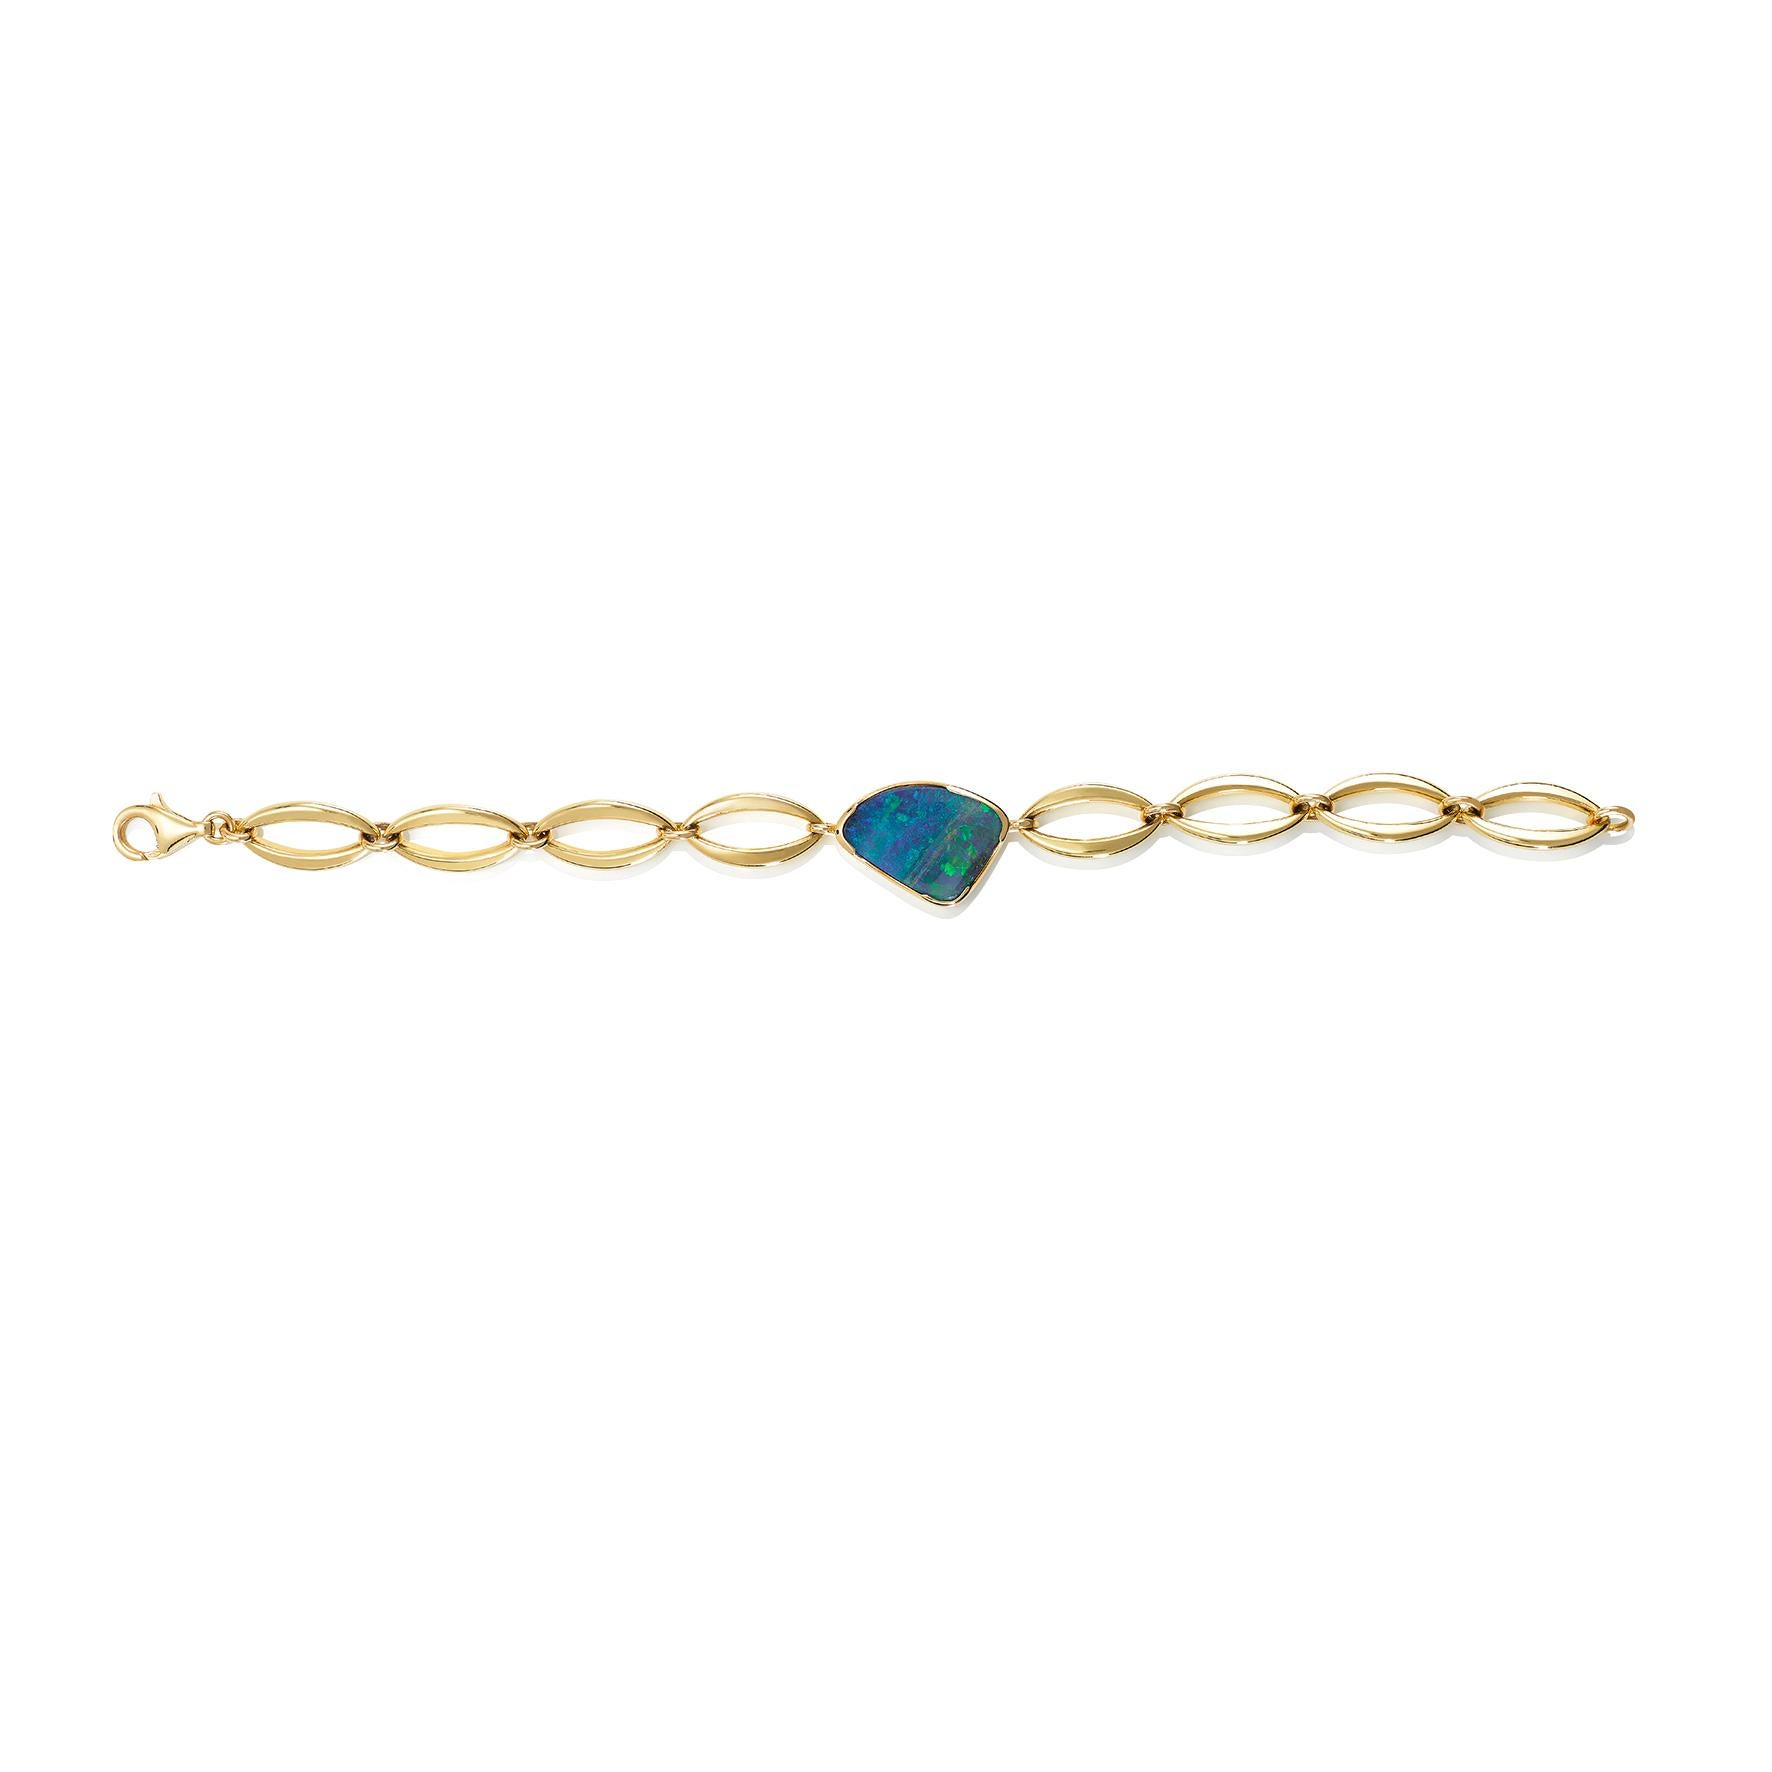 Giulians contemporary 18 karat yellow gold Australian Boulder Opal bracelet.  Showcasing a 7.90ct free-form natural solid opal from Queensland with bright blue and green play-of-color. The opal has been set in a fine 18ct yellow gold bezel, with